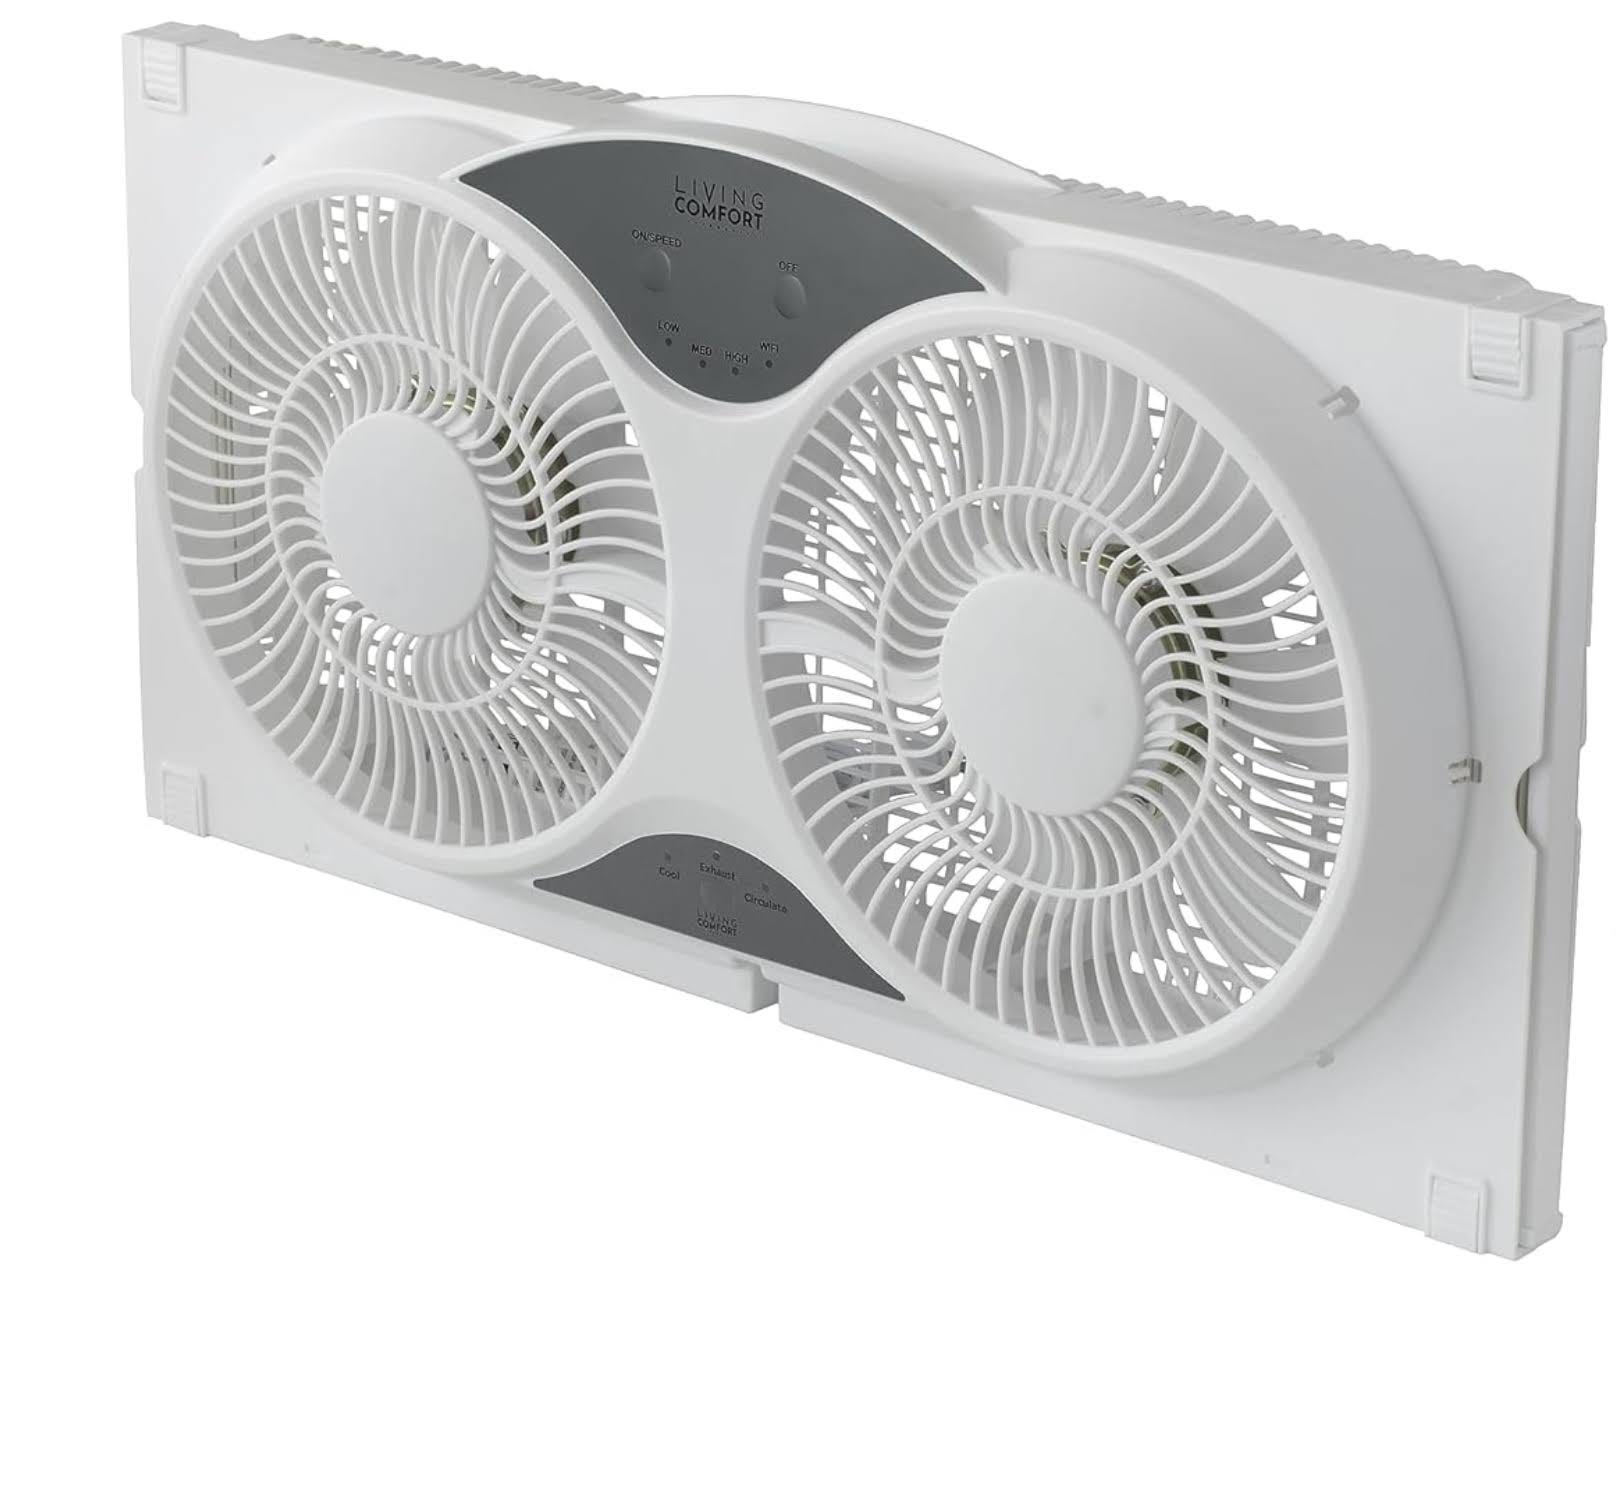 Comfort Zone Window Exhaust Fan: Wi-Fi Smart, 3-Speed, Expandable, and Bug Screen Included | Image